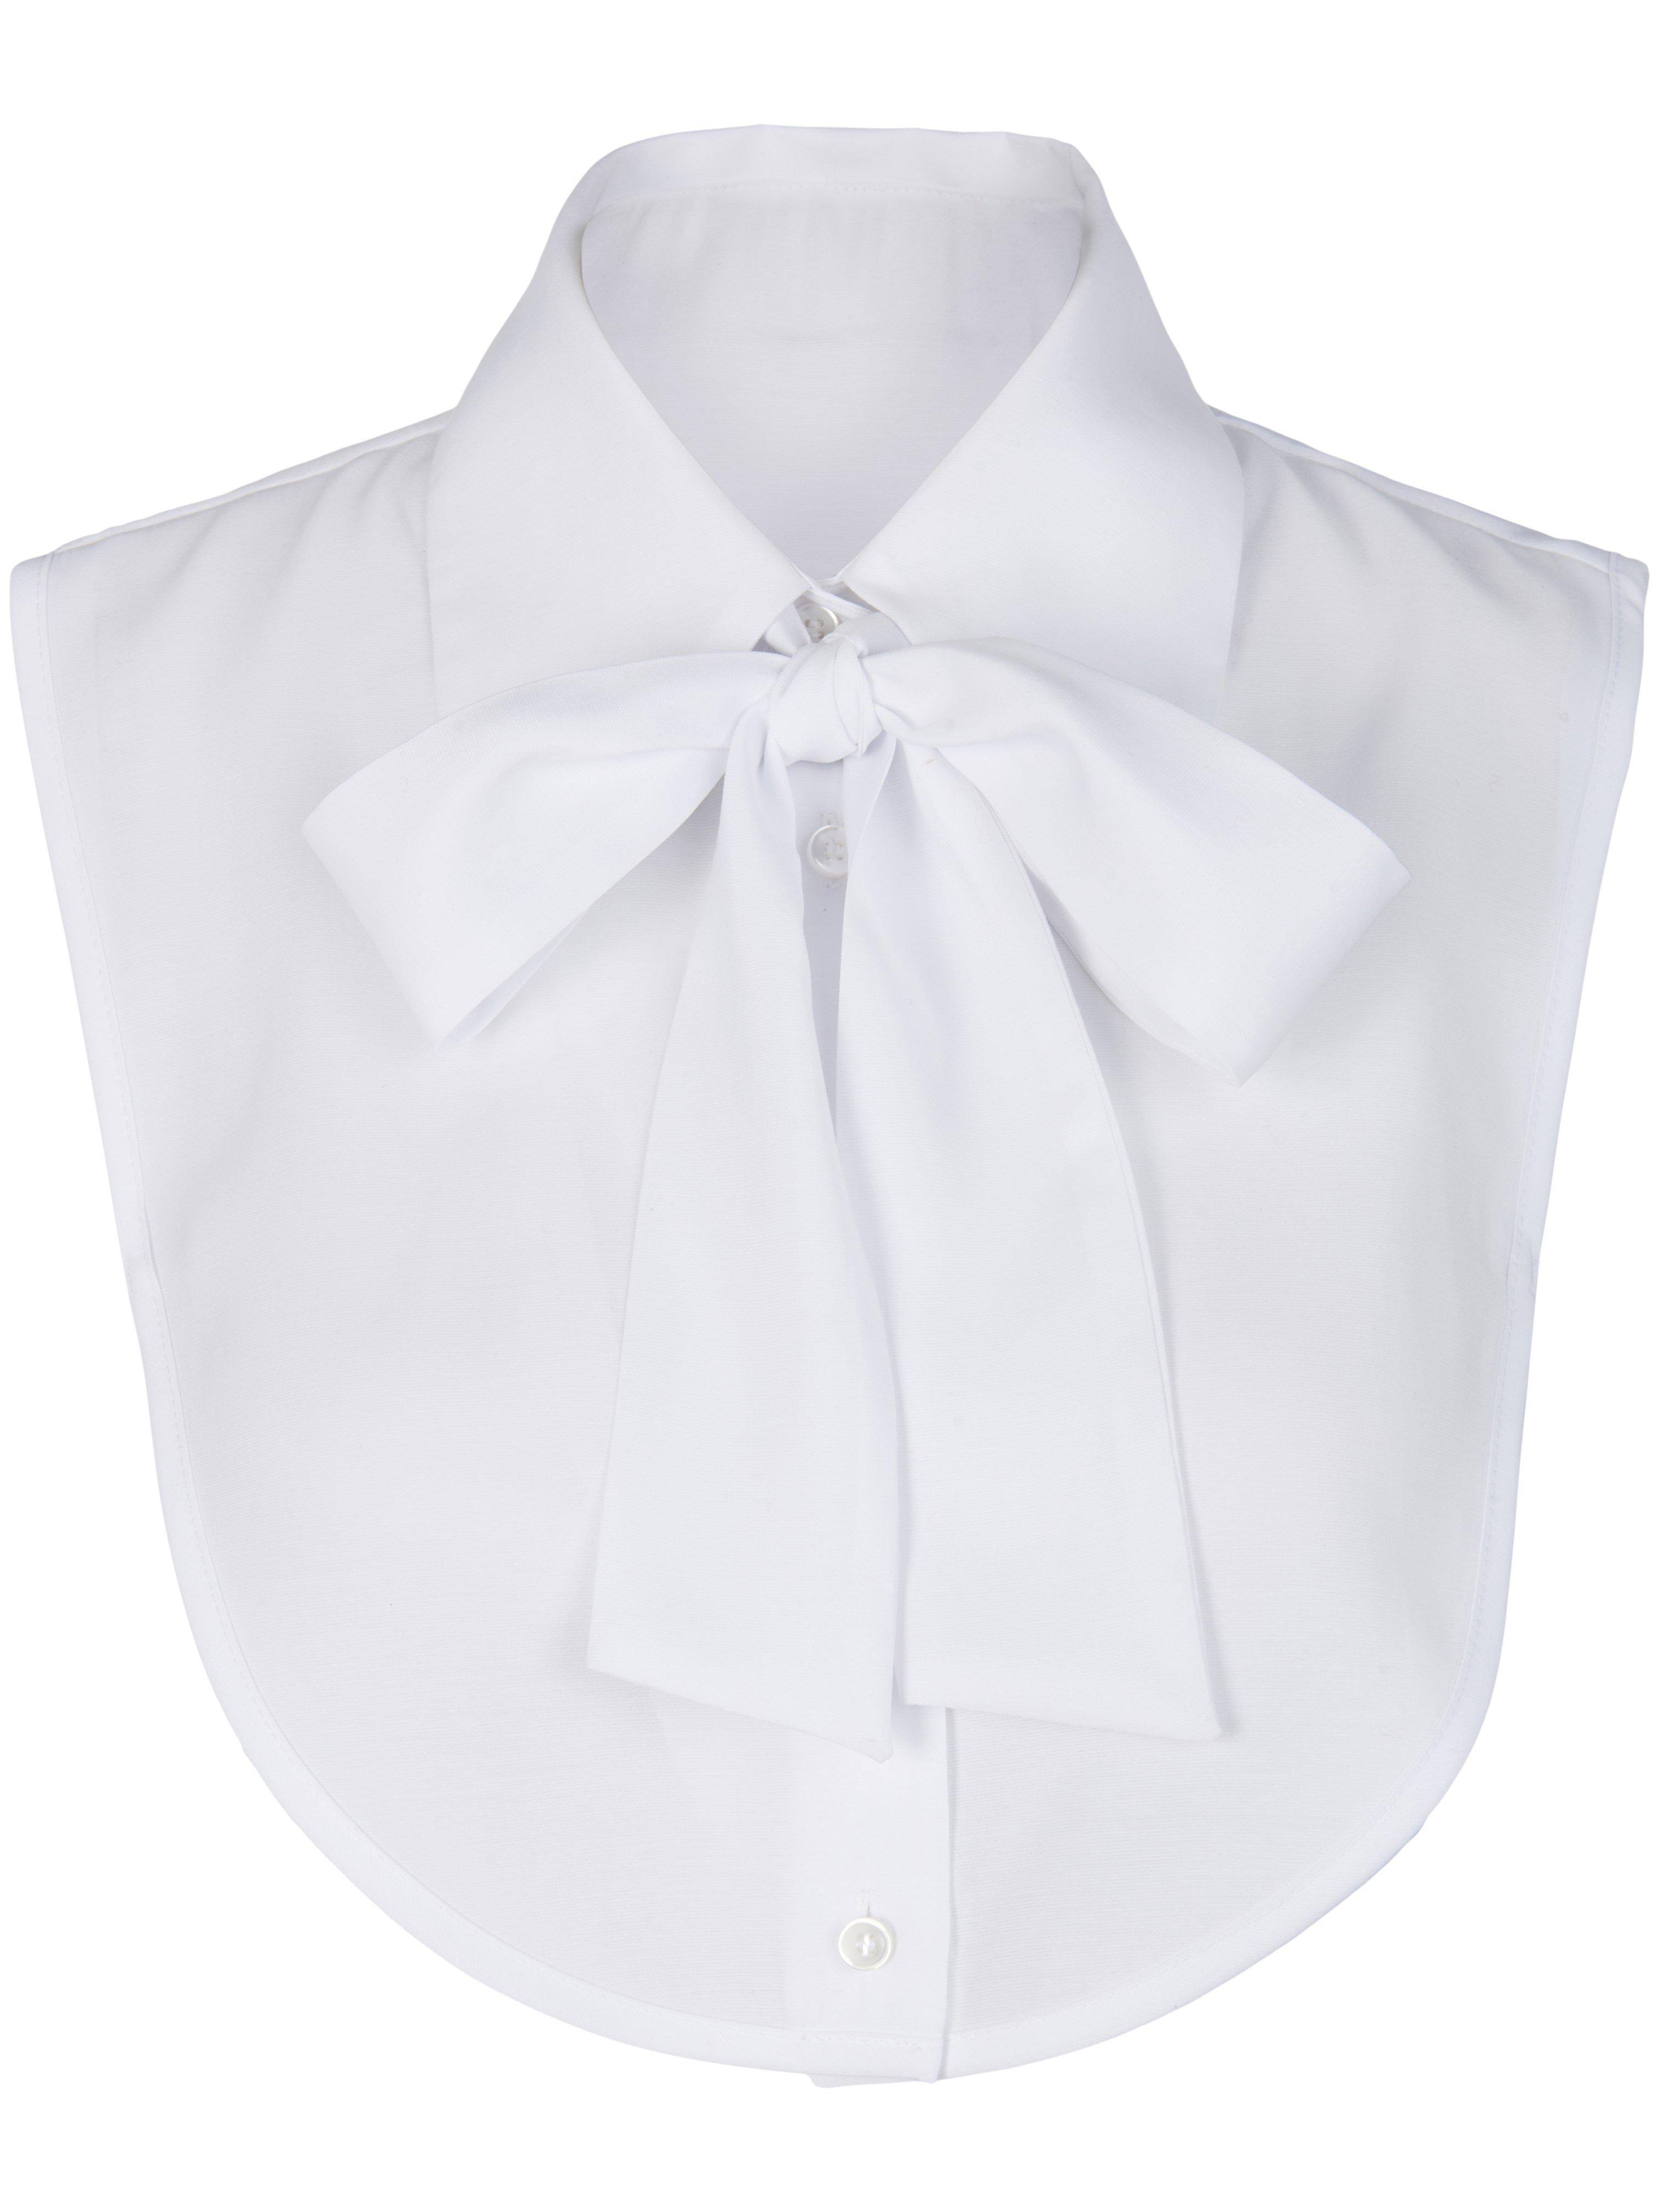 Image of Blouse collar spectacular pussy cat bow Uta Raasch white